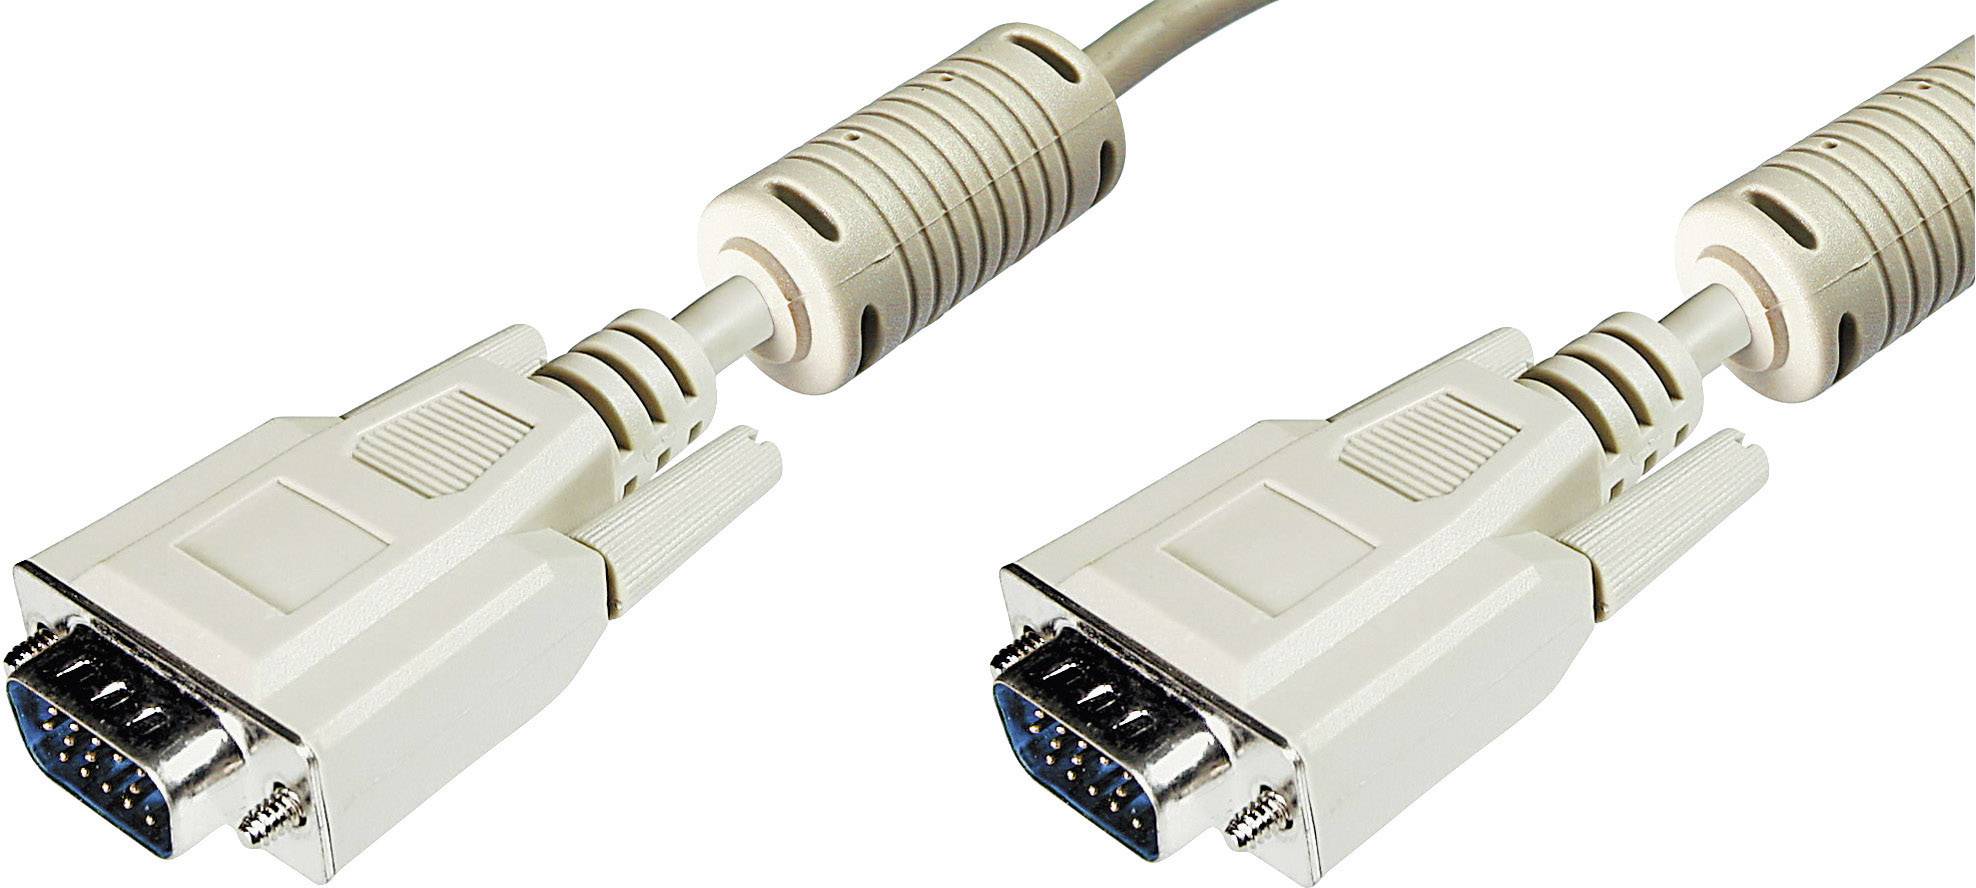 VGA MONITOR CONNECTION CABLE,3